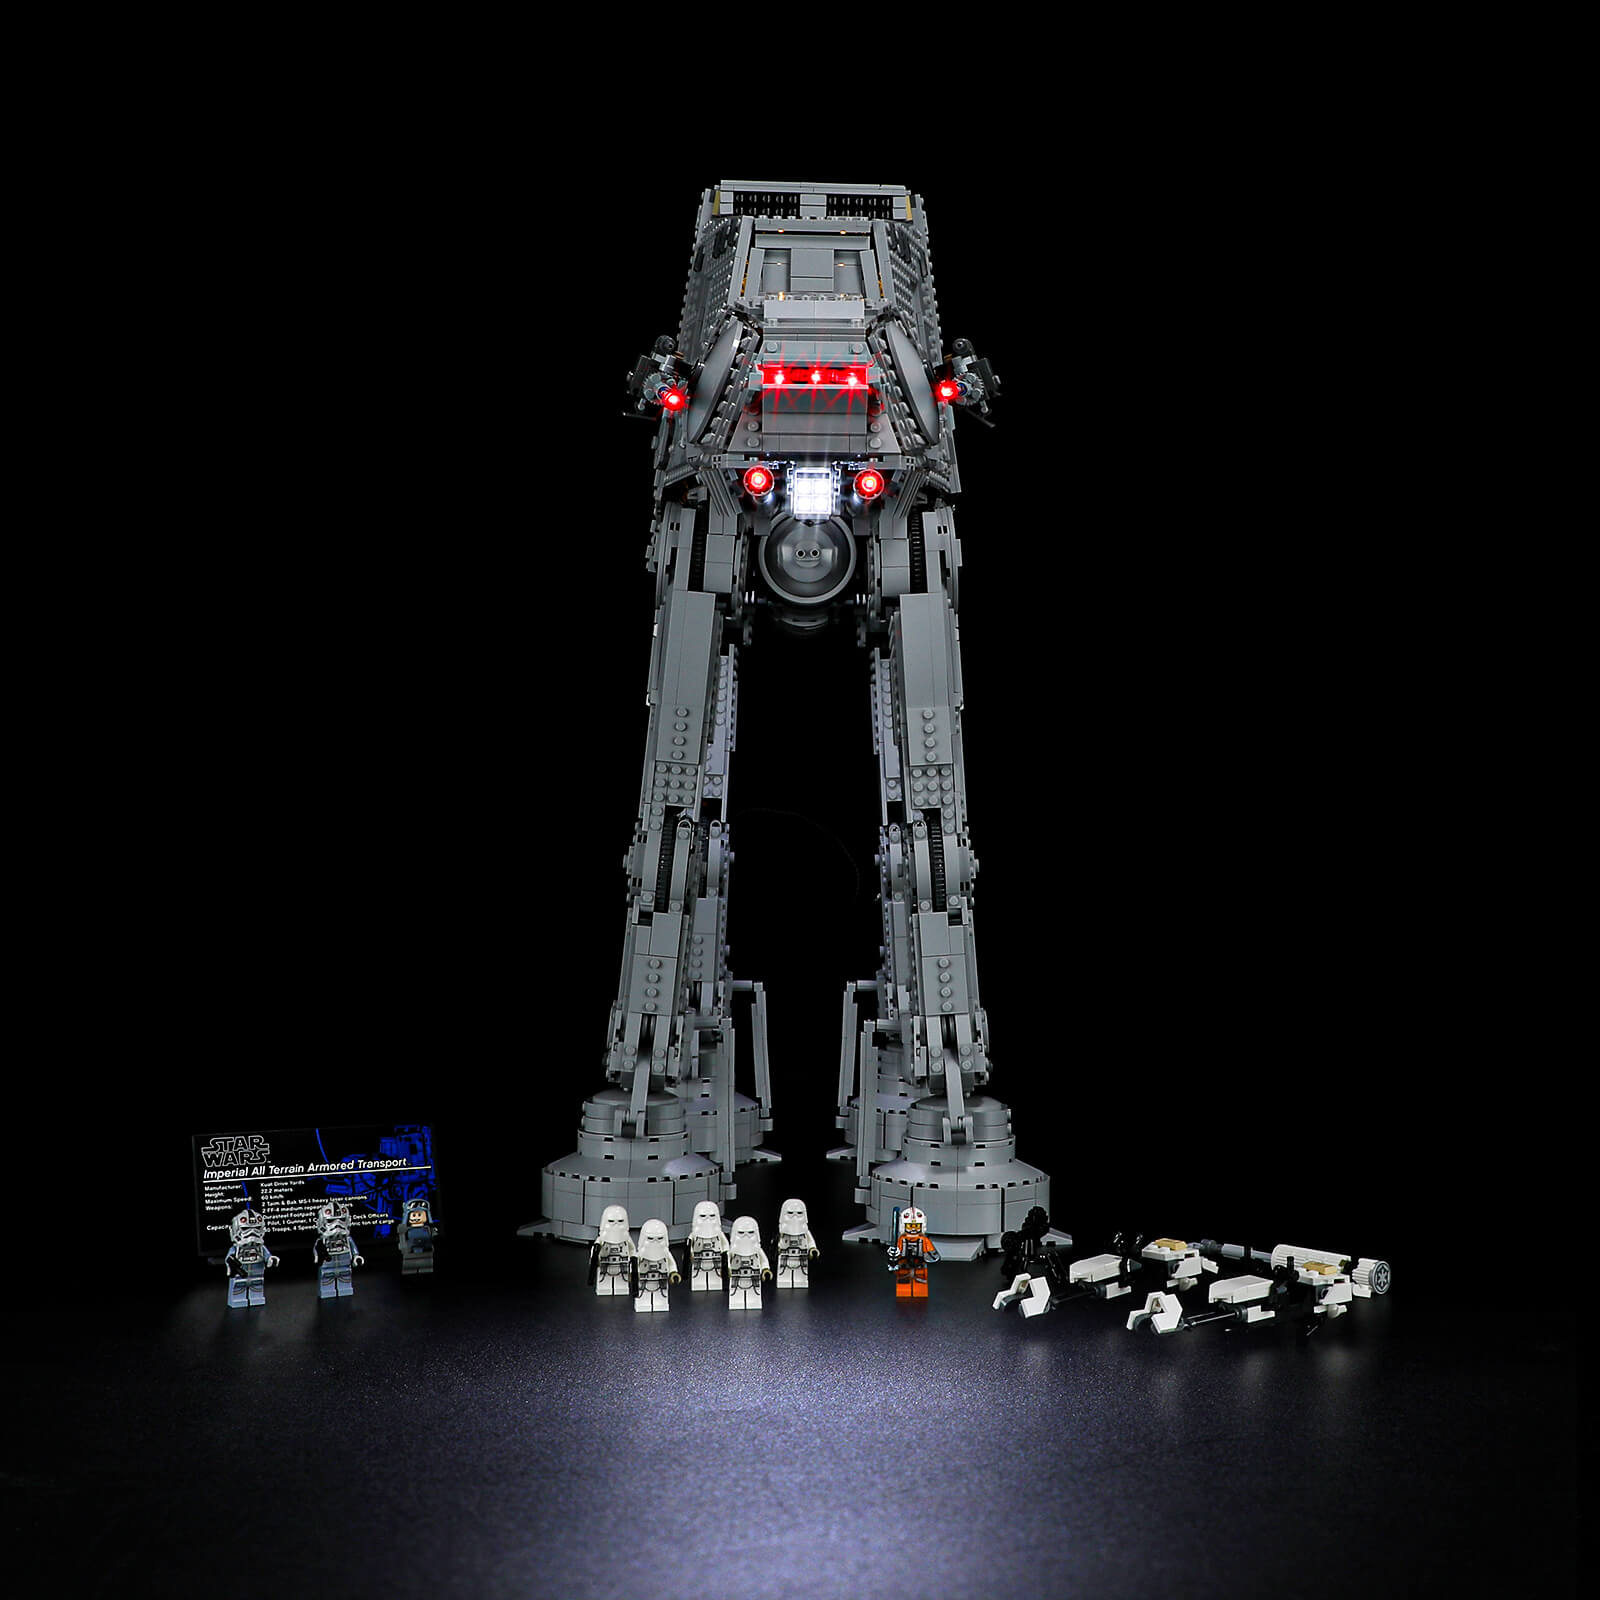  BRIKSMAX Led Lighting Kit for LEGO-75313 at-at - Compatible  with Lego Star Wars Building Blocks Model- Not Include The Lego Set : Toys  & Games